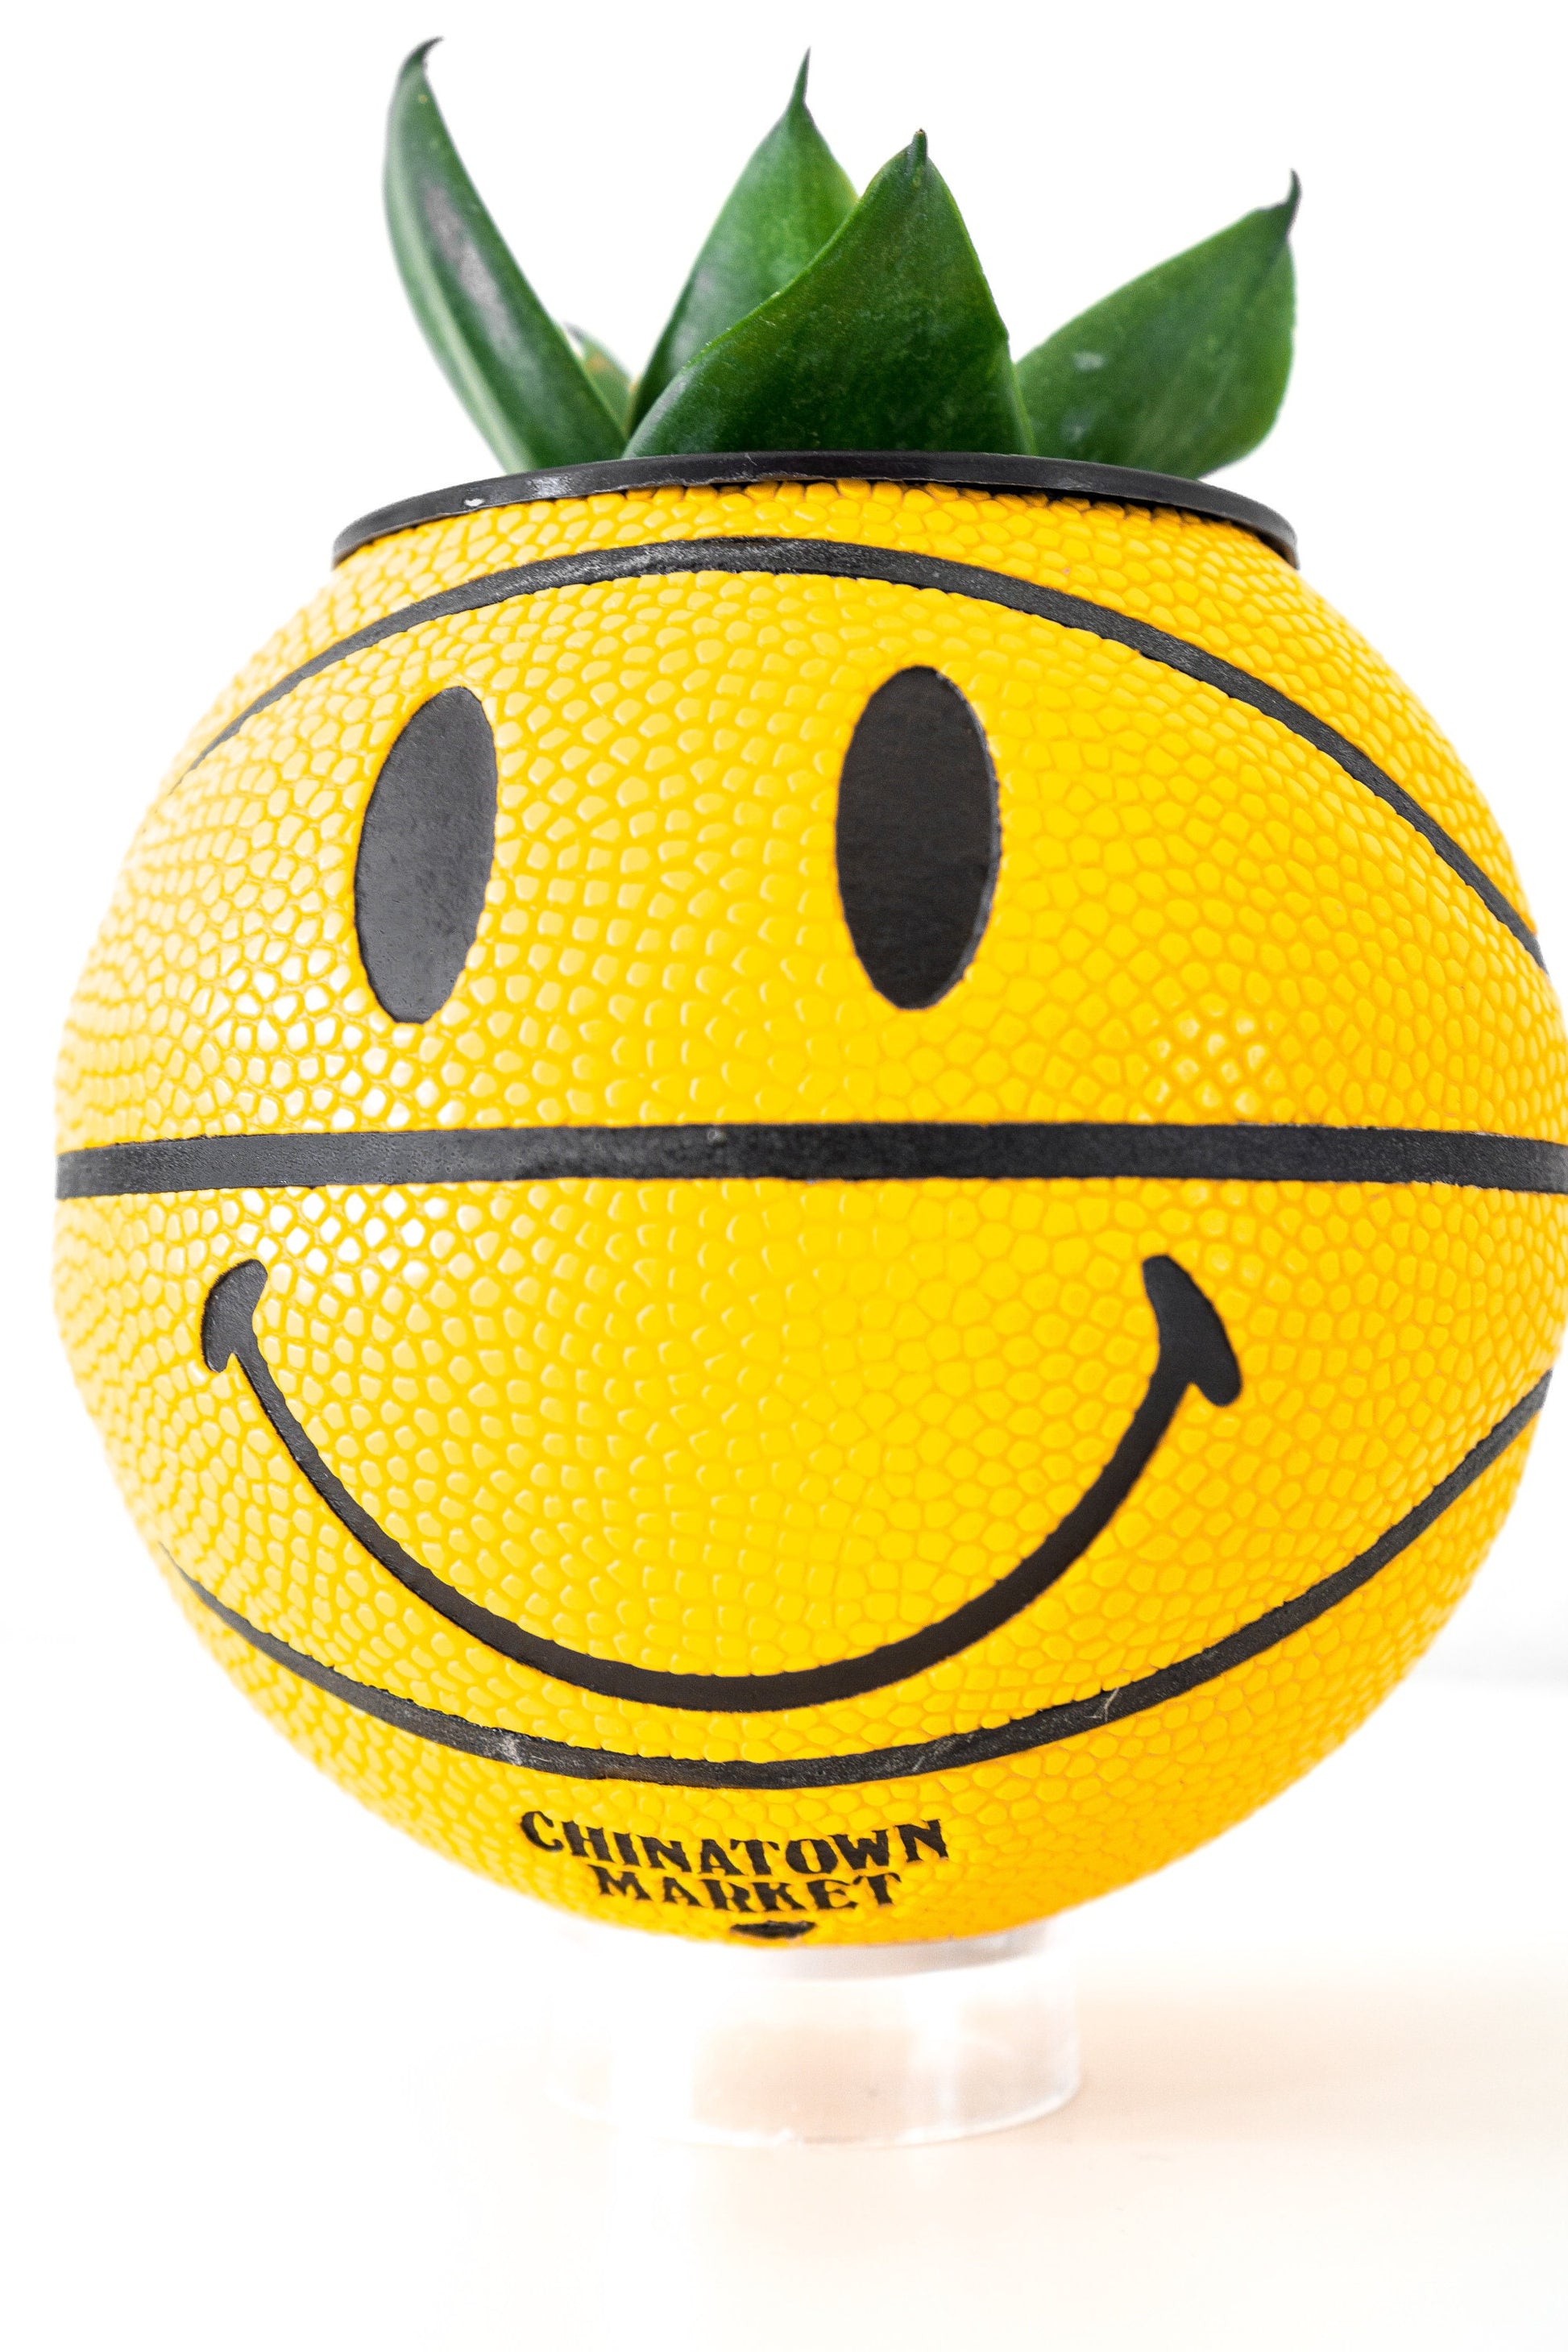 plntrs - Chinatown Market Smiley Face Mini Basketball Planter - new ball with stand